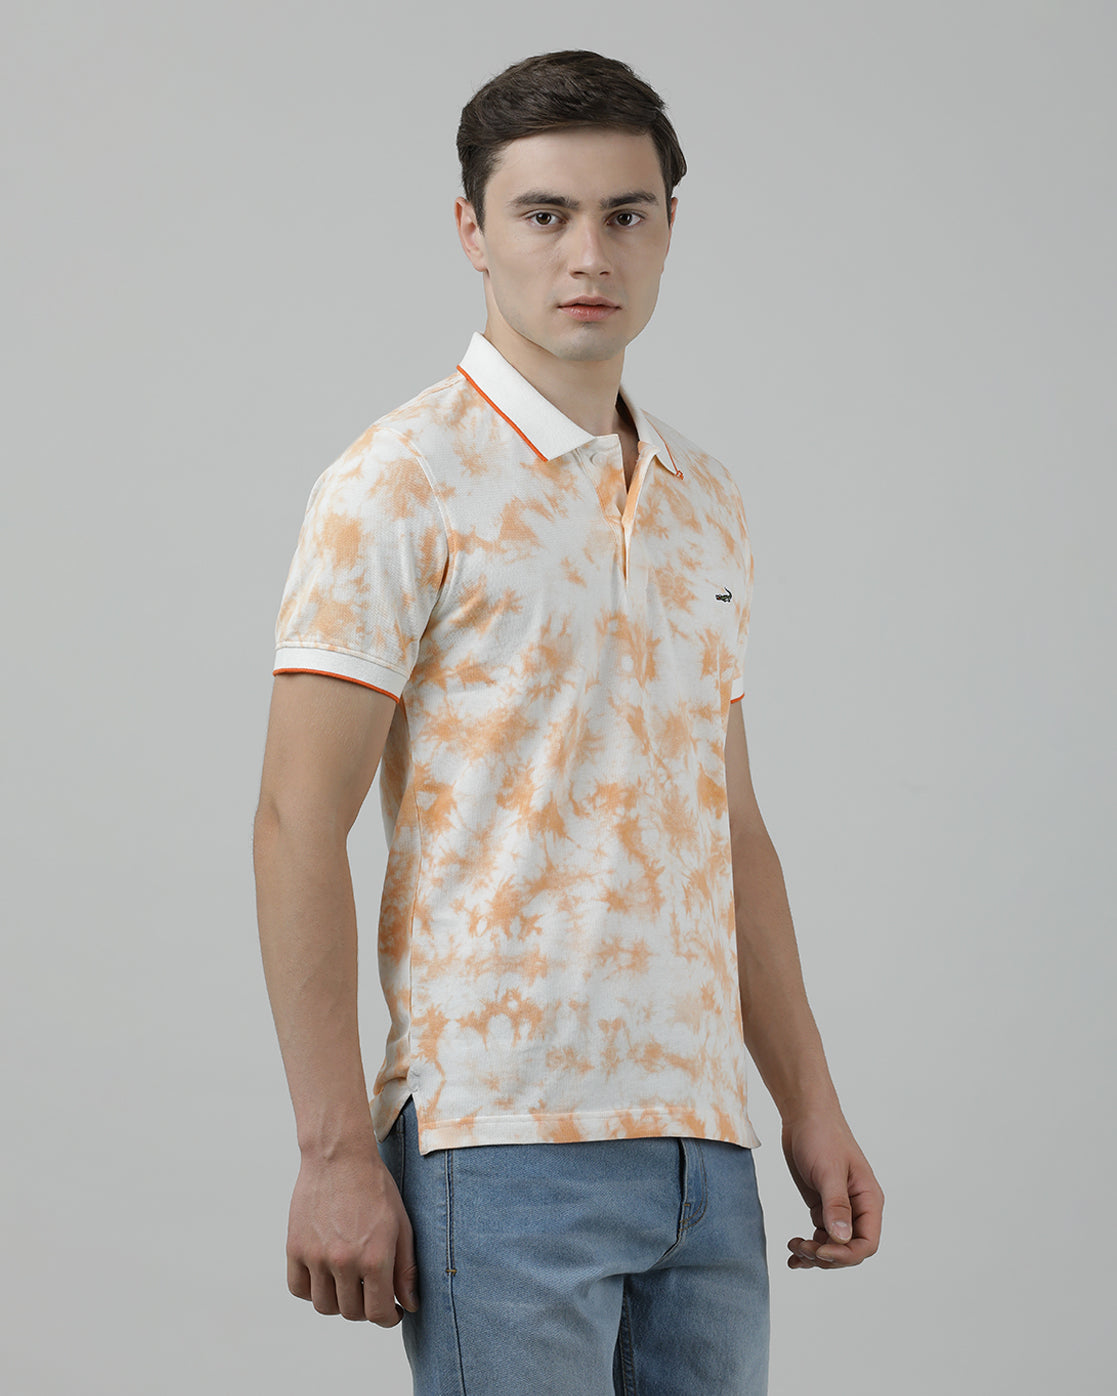 Casual Orange T-Shirt Tie and Dye Half Sleeve Slim Fit with Collar for Men